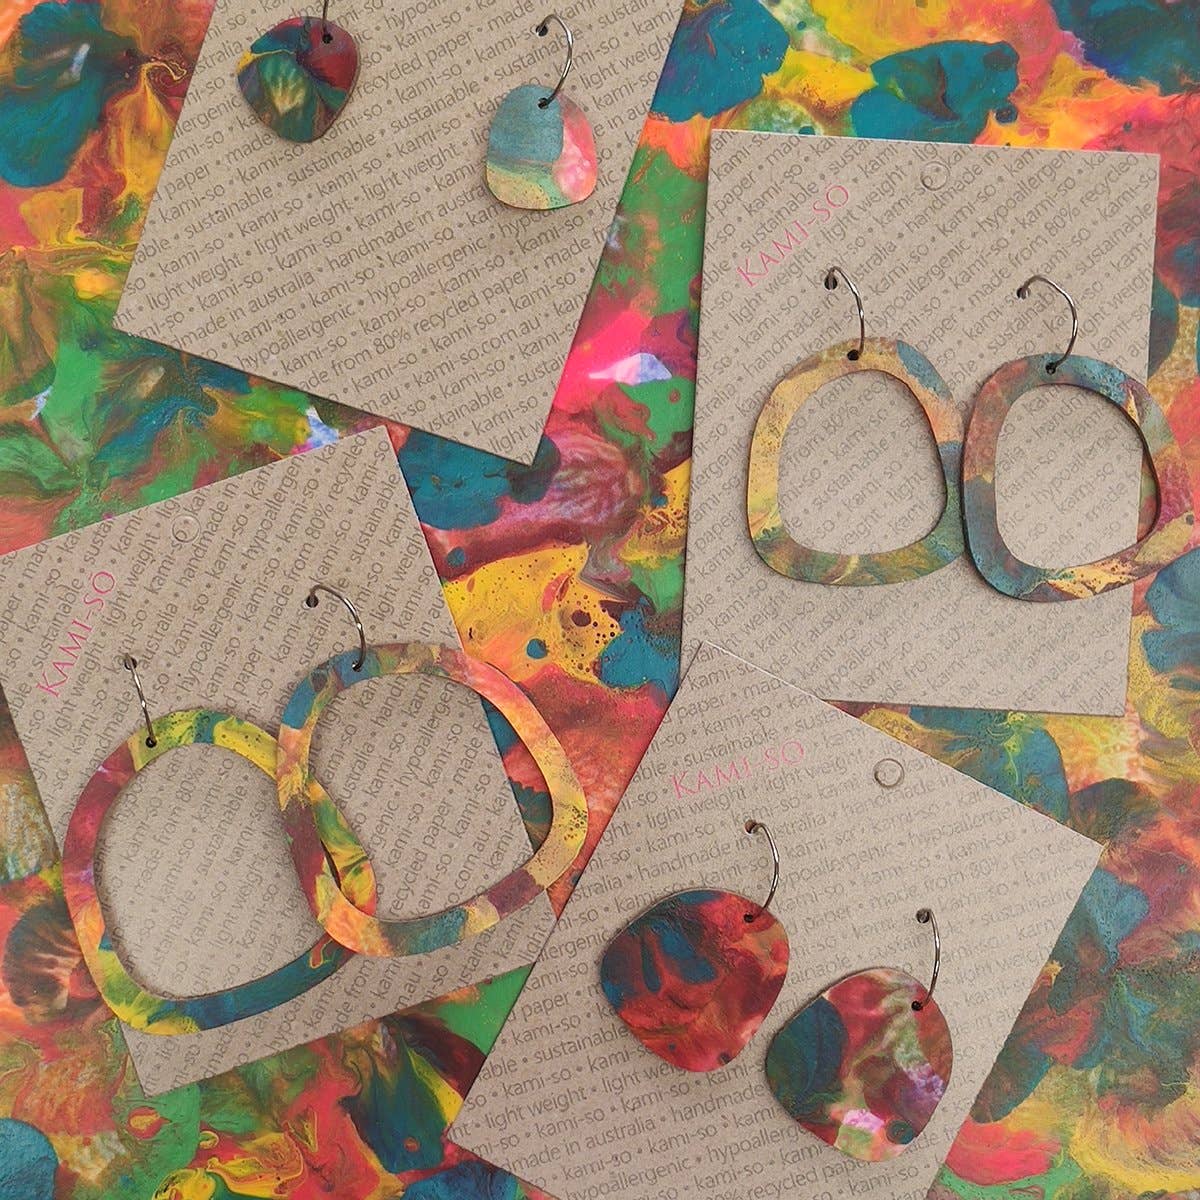 KAMI-SO- Square Recycled Paper Earrings - Multicolour 3: Large Hoop